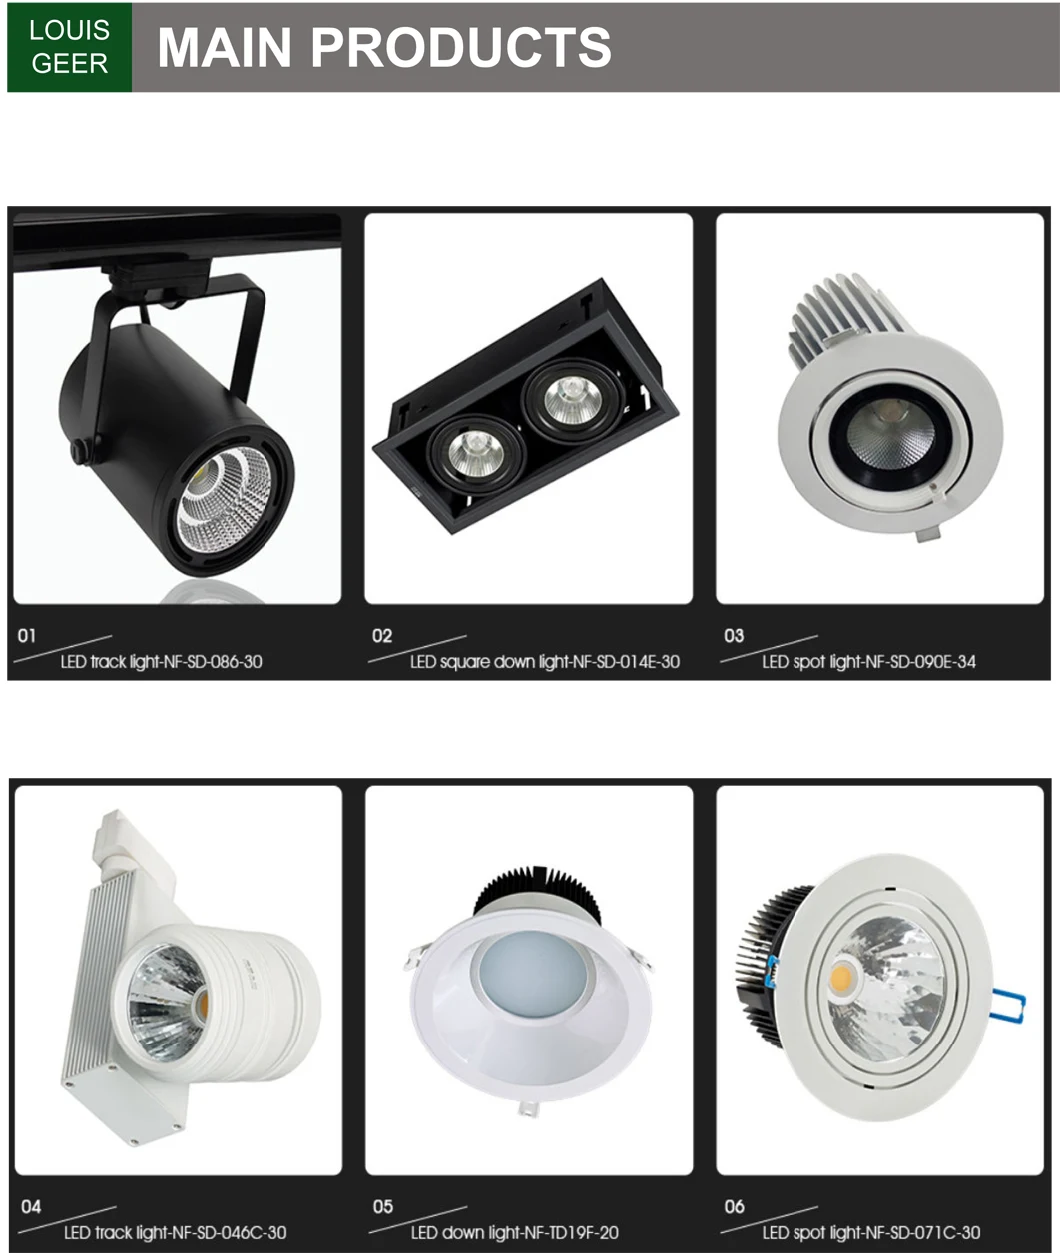 Aluminum Round LED Light LED Lamp Bulb Dimmable Cylindrical COB LED Downlights 20W LED Downlight